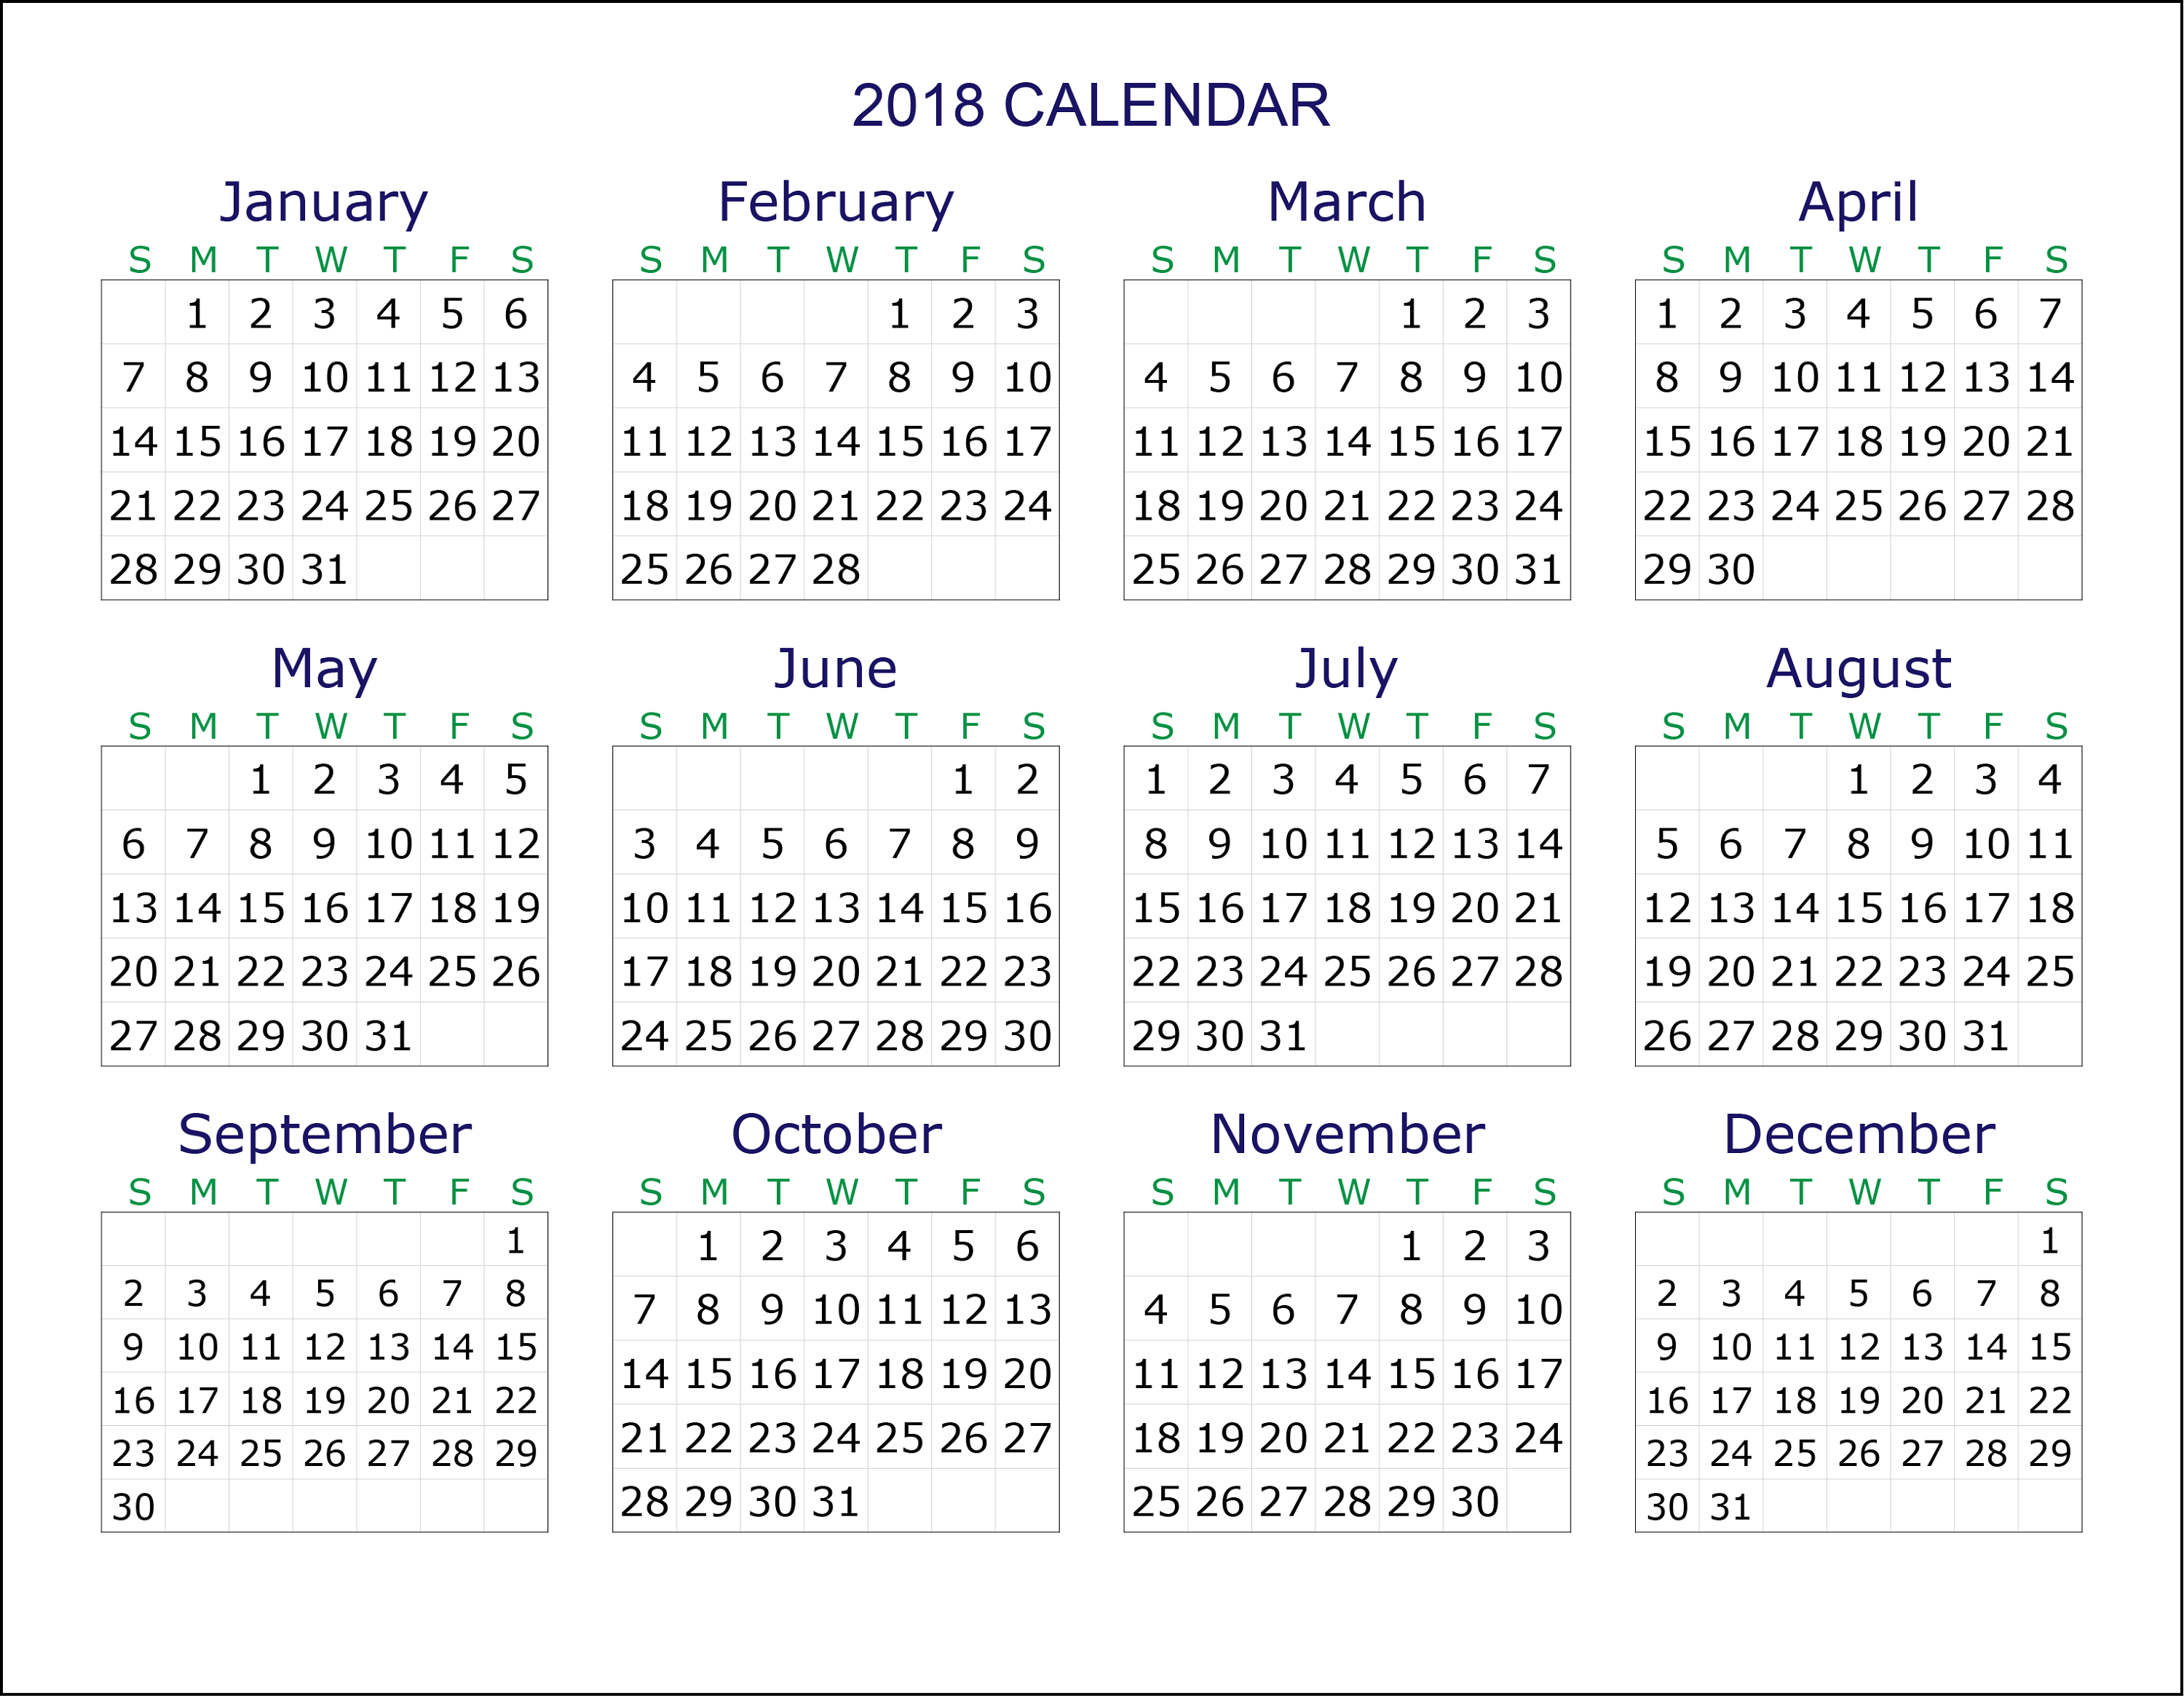 Yearly 2018 Calendars Downloadable | Activity Shelter
